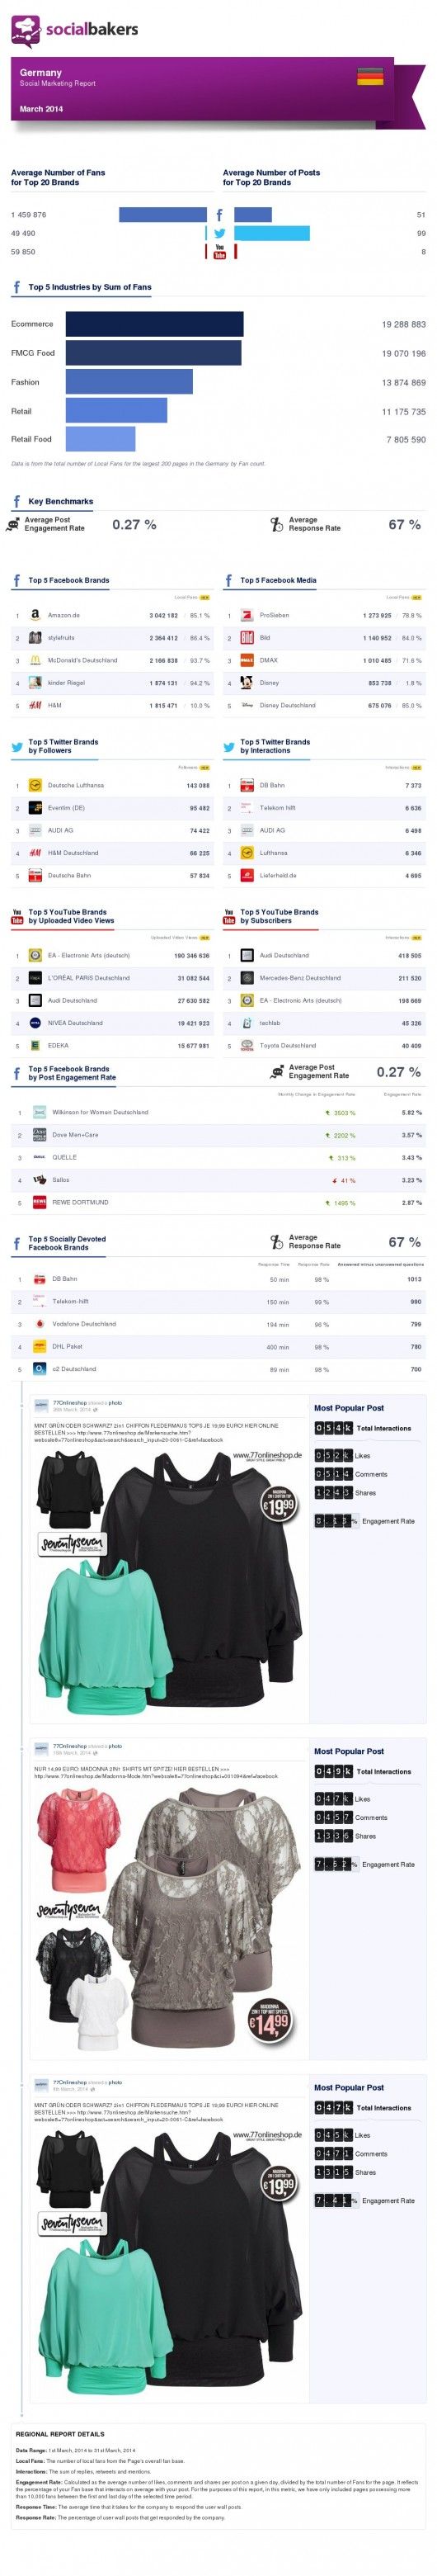 14-04-15 march-2014-socialbakers-report-germany